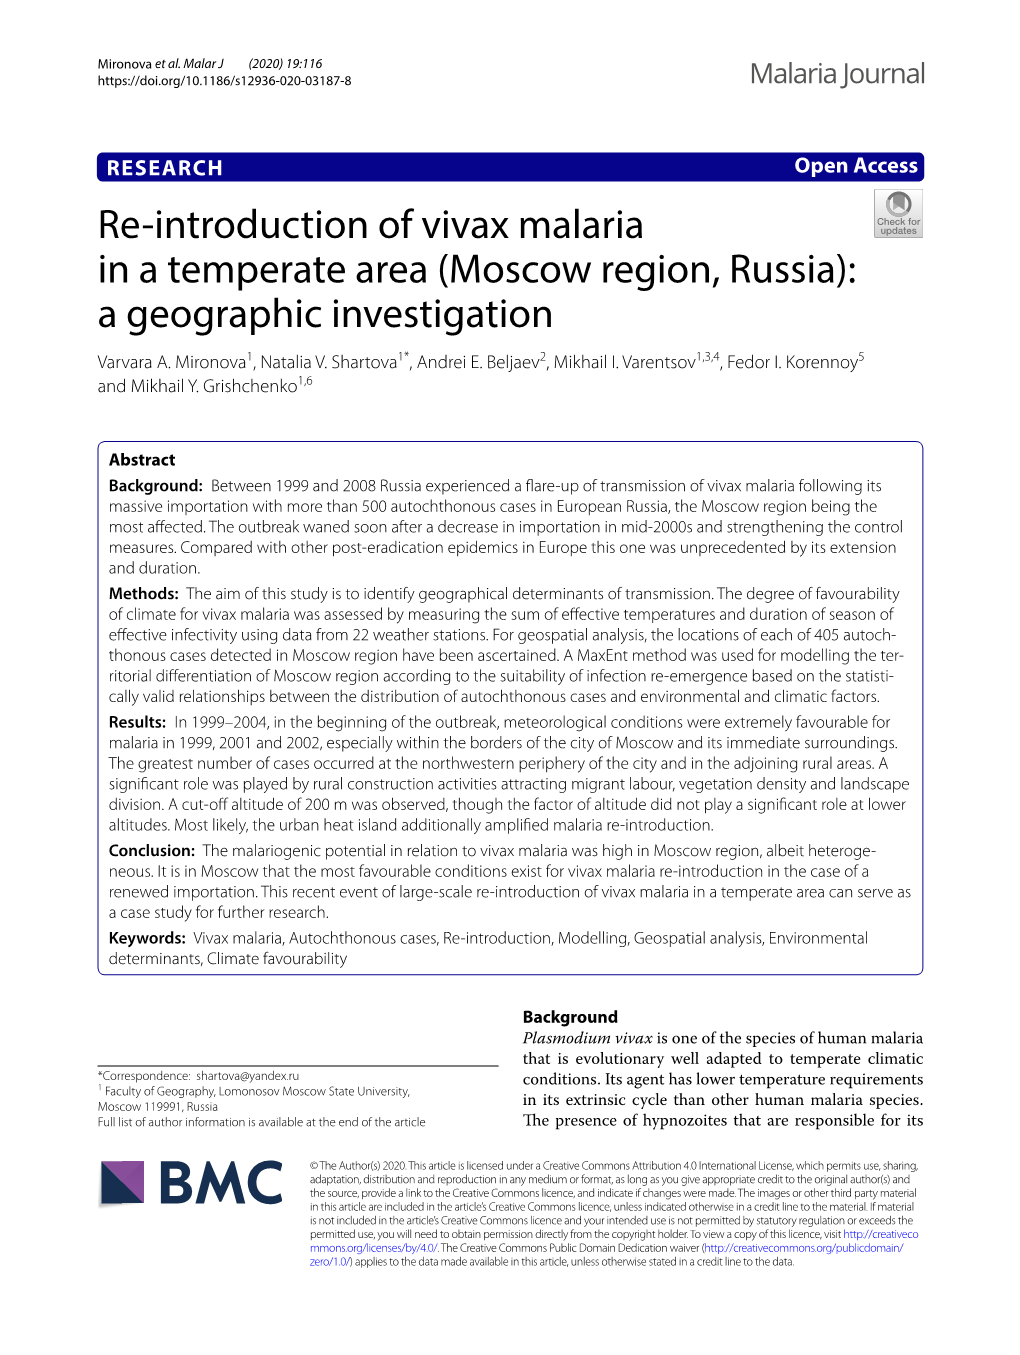 Re-Introduction of Vivax Malaria in a Temperate Area (Moscow Region, Russia): a Geographic Investigation